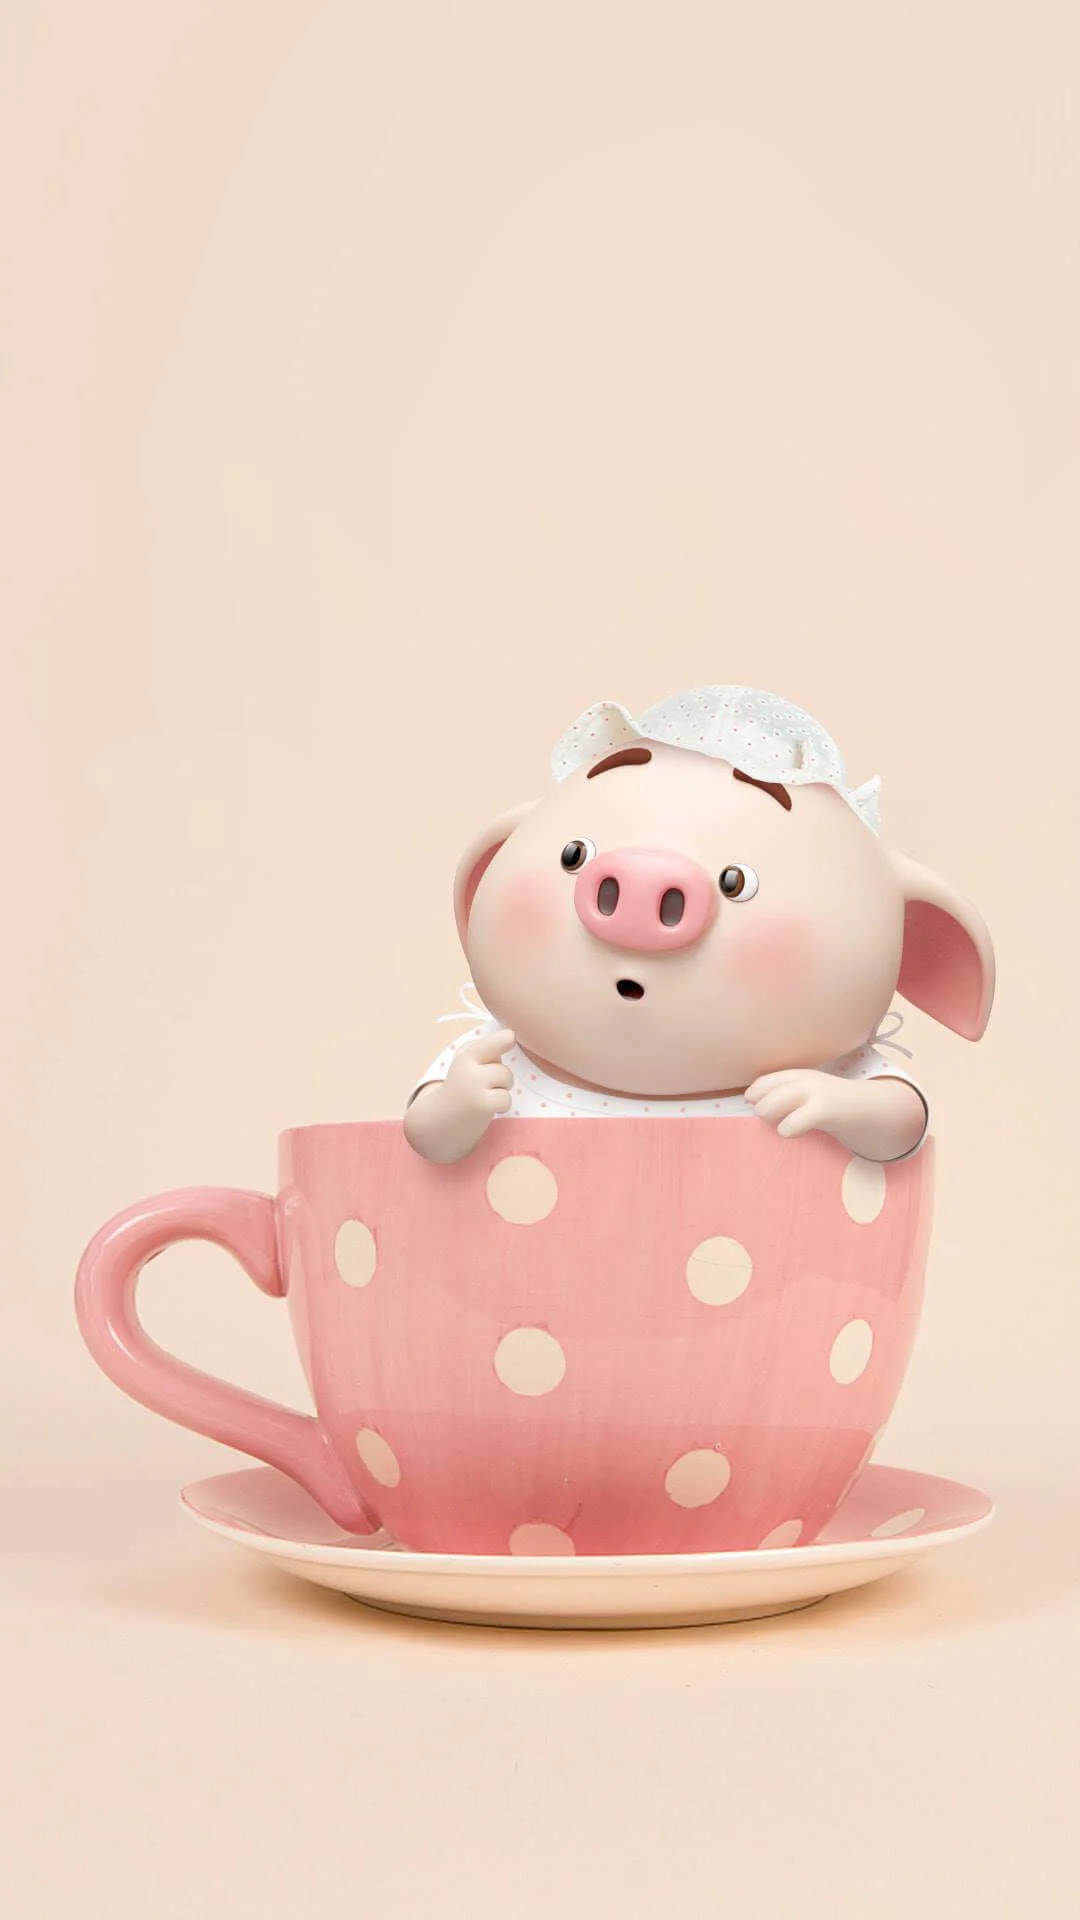 Cute Pig On A Teacup Background